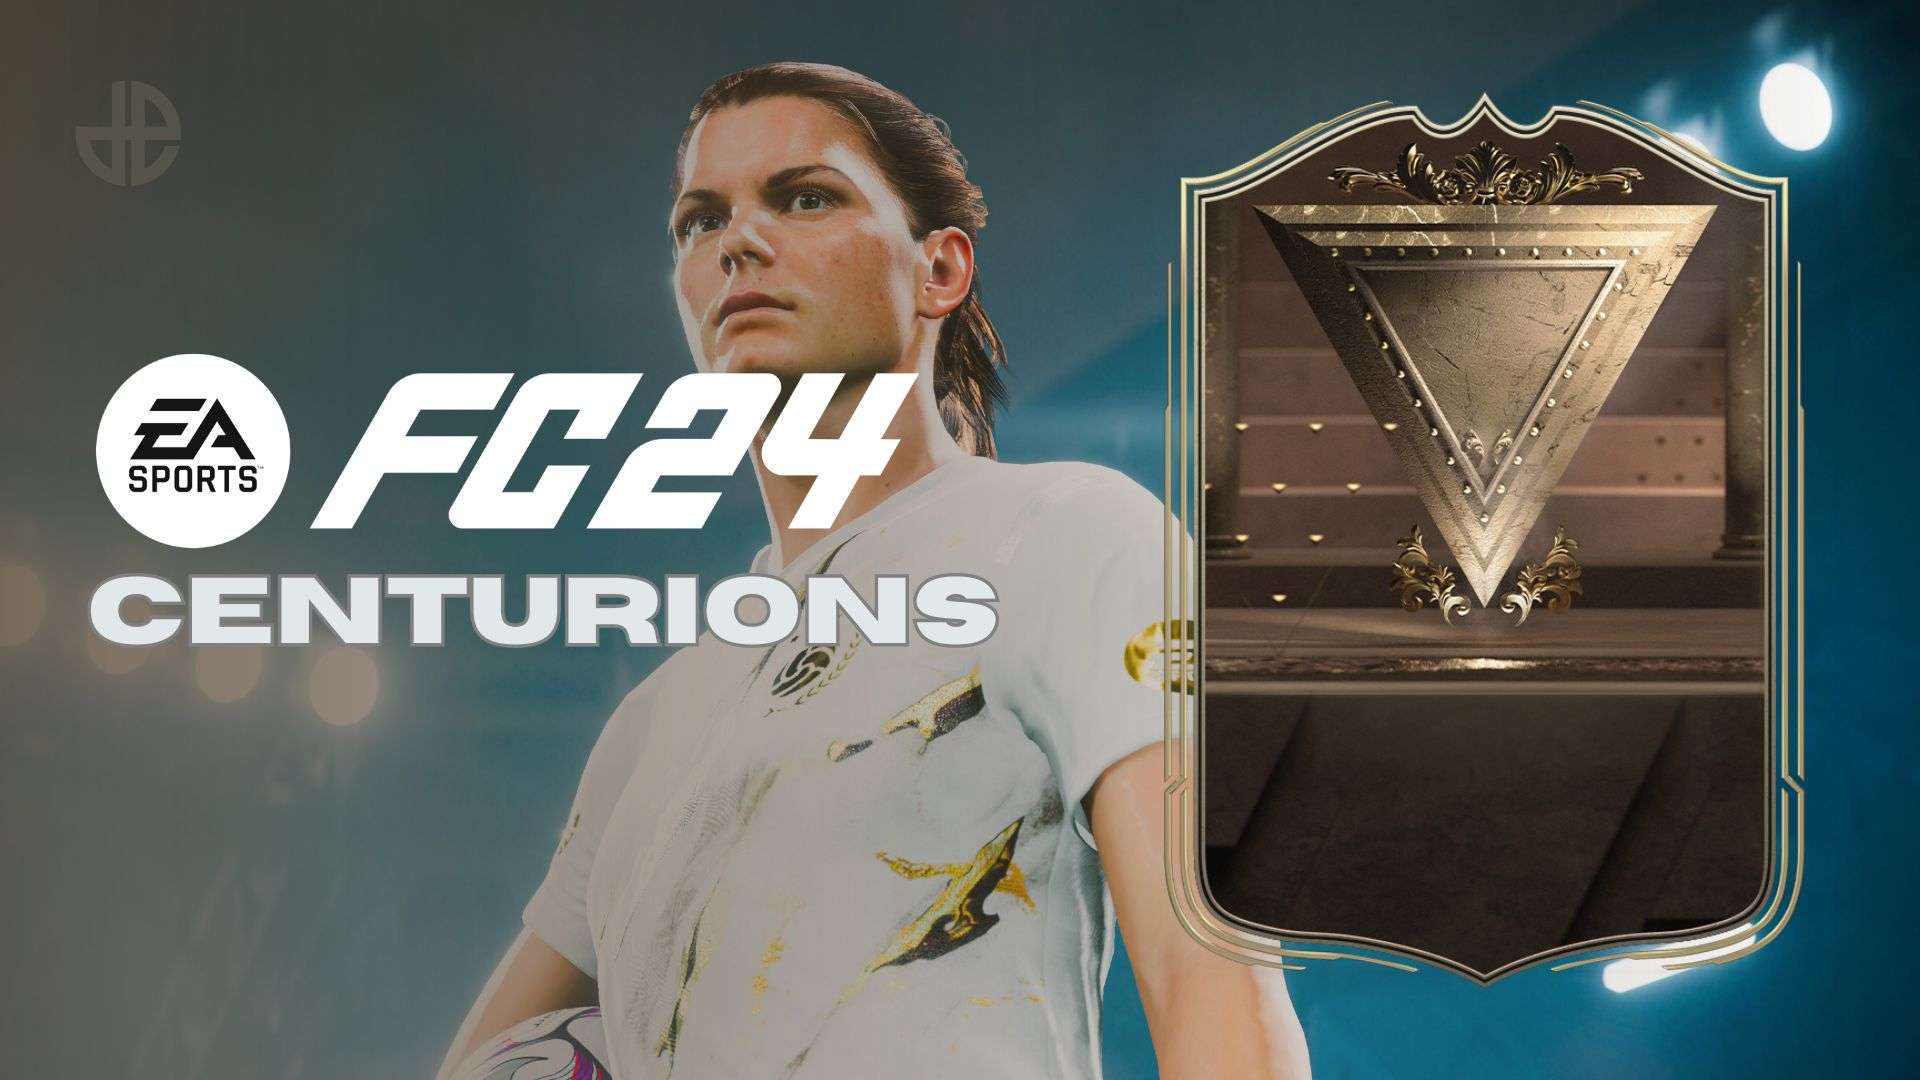 EA SPORTS FC image of Mia Hamm with Centurions card from EA FC 24